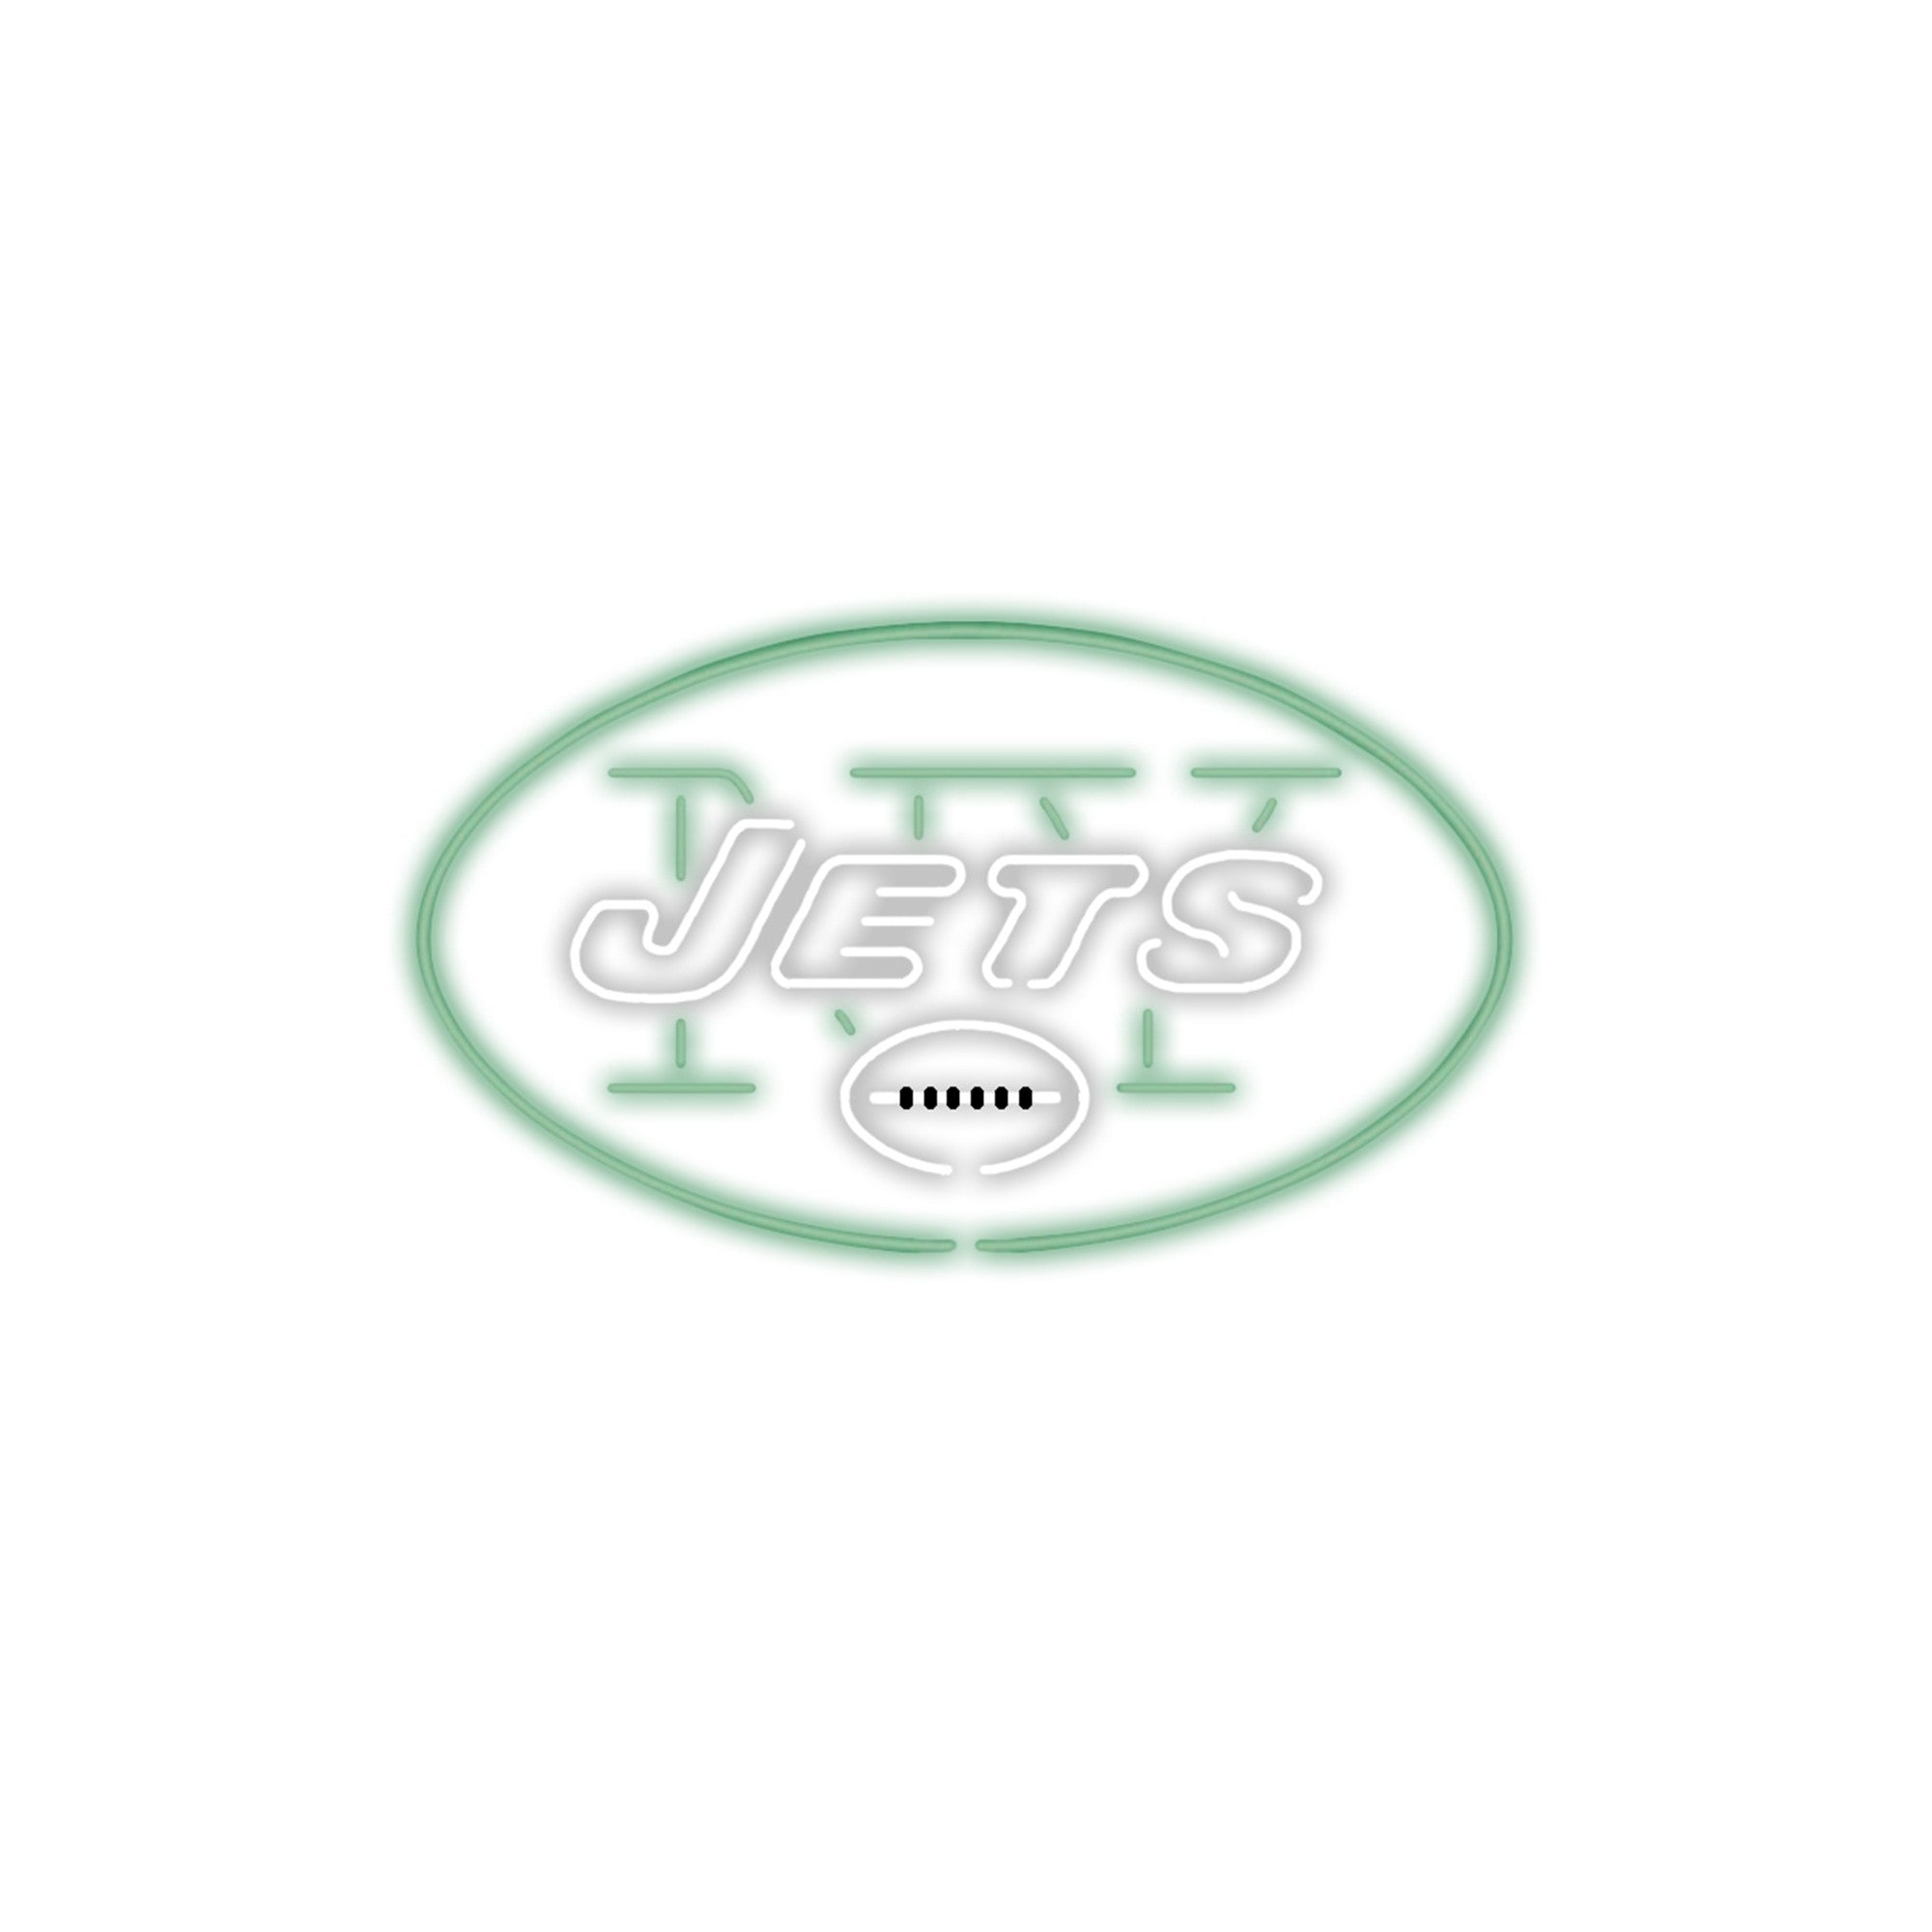 Imperial New York Jets Neon Light